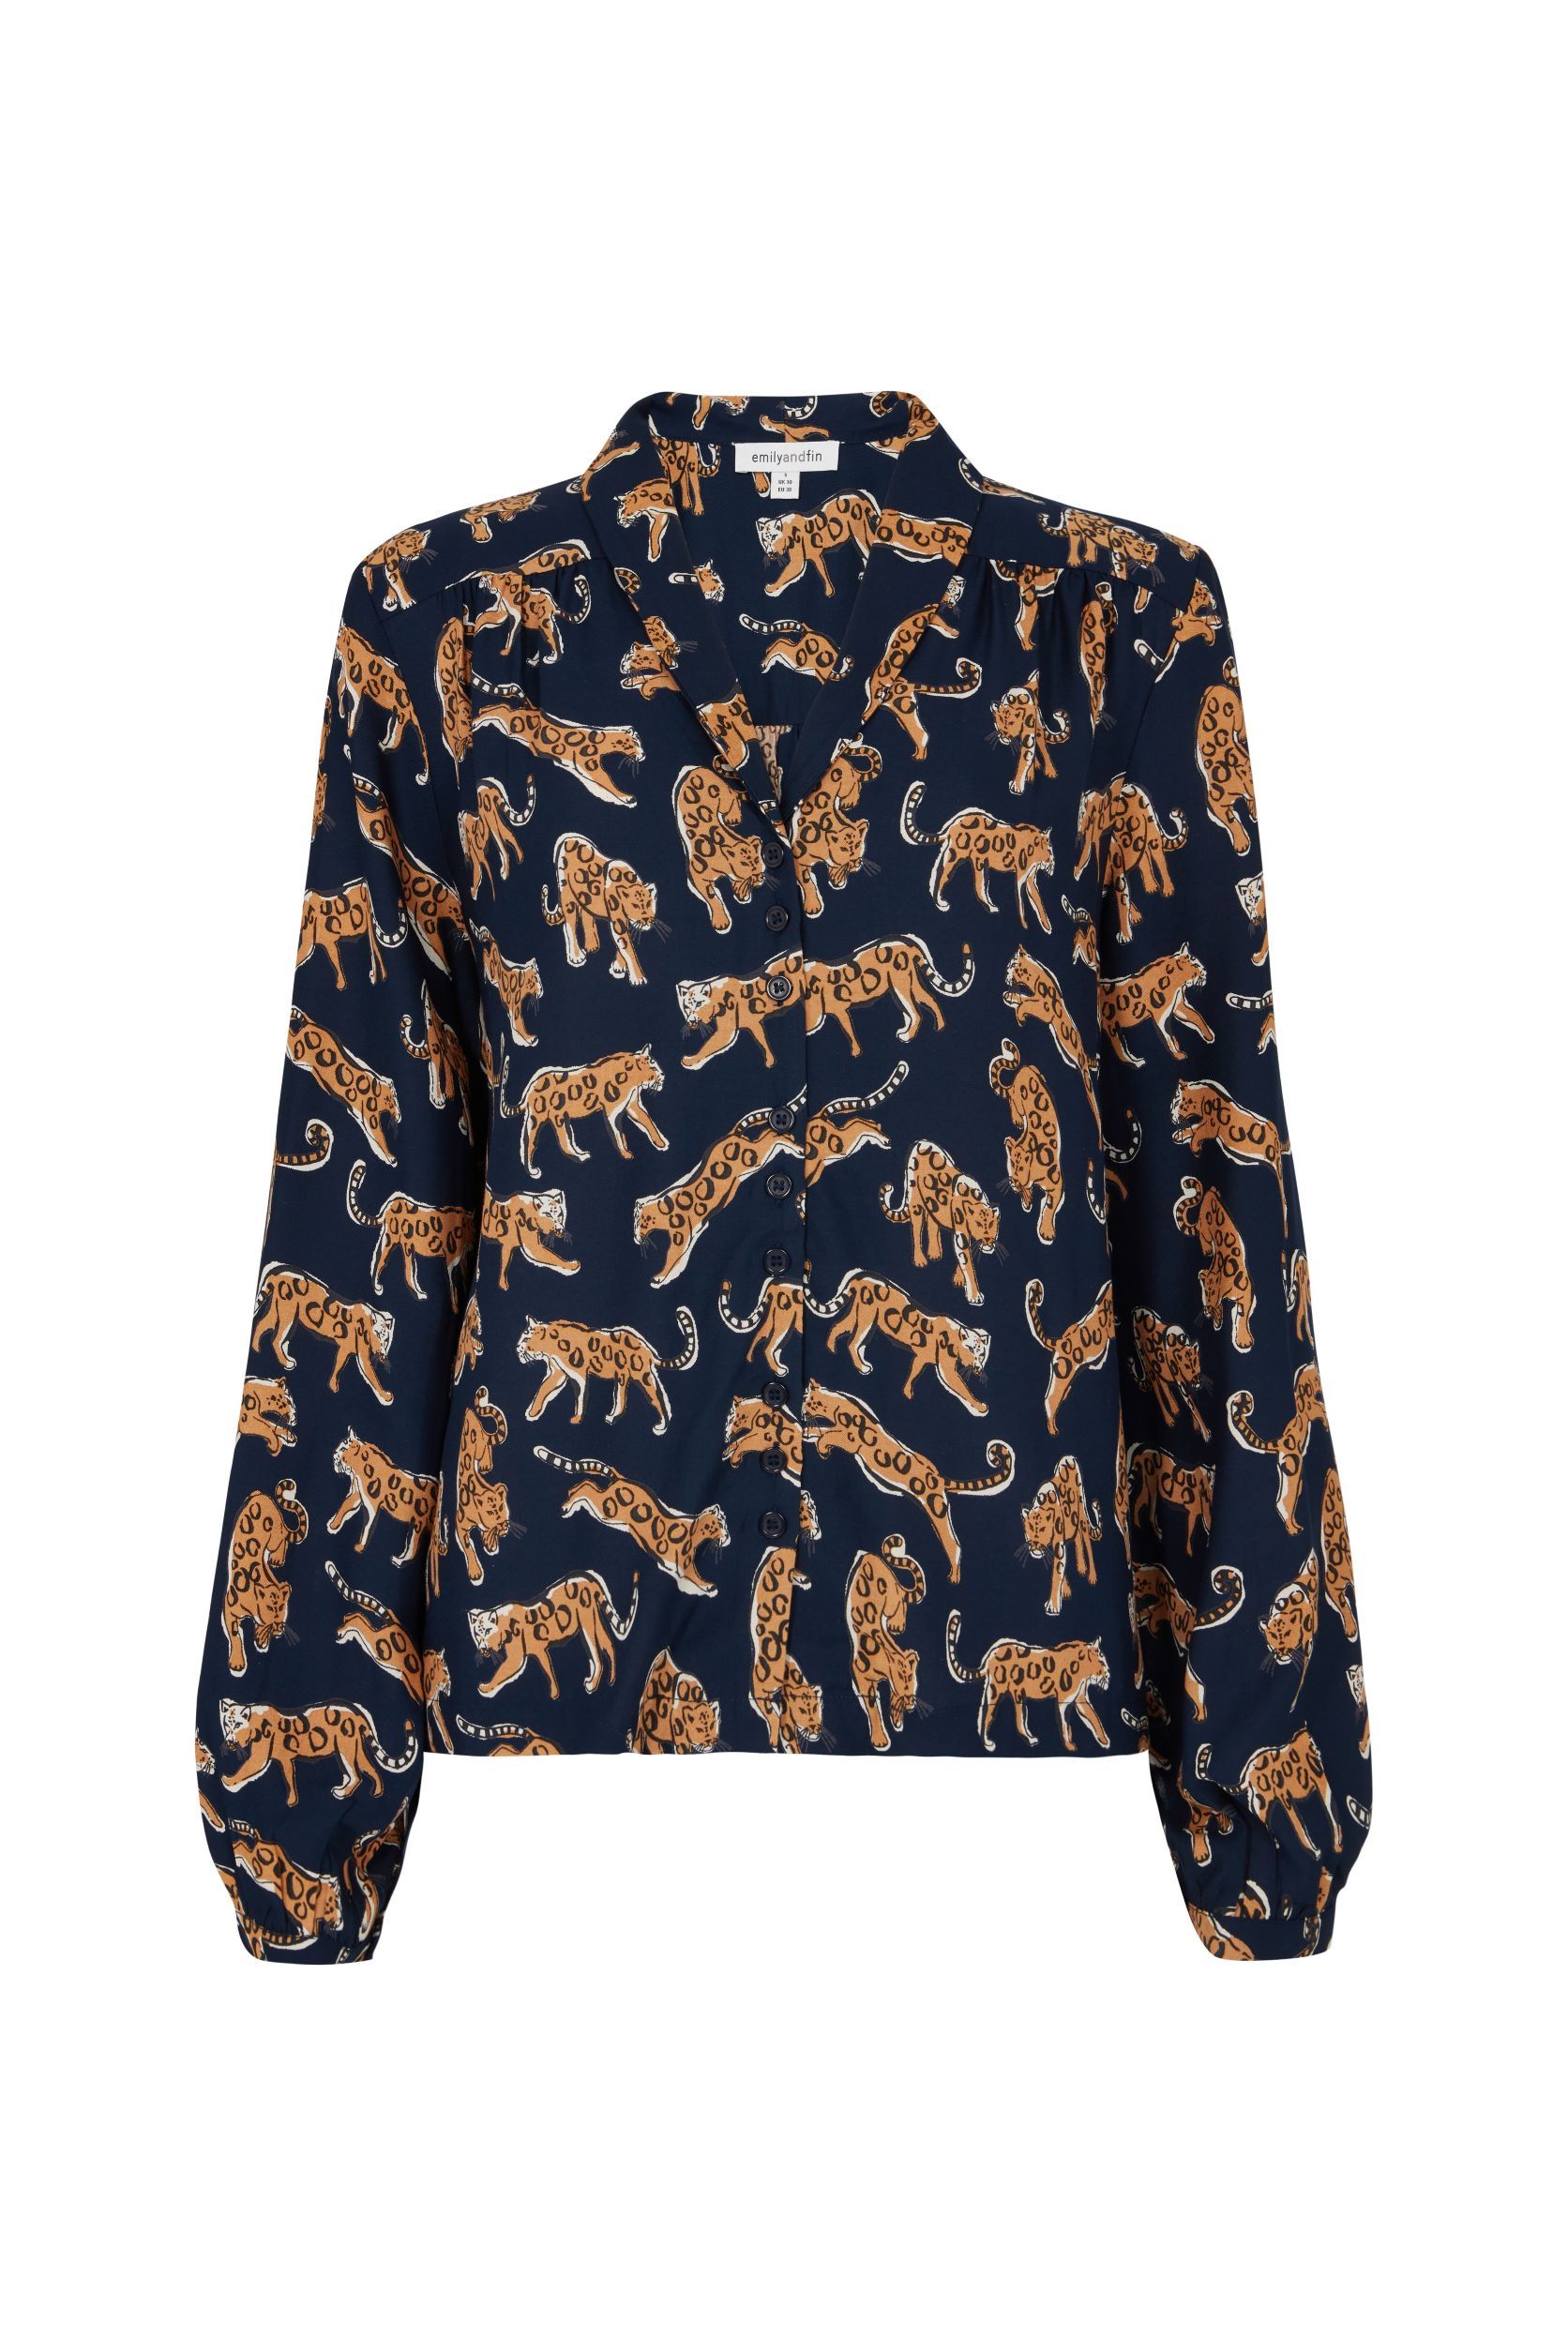 Emily & Fin Edie Blouse Leaping Leopards - BouChic 